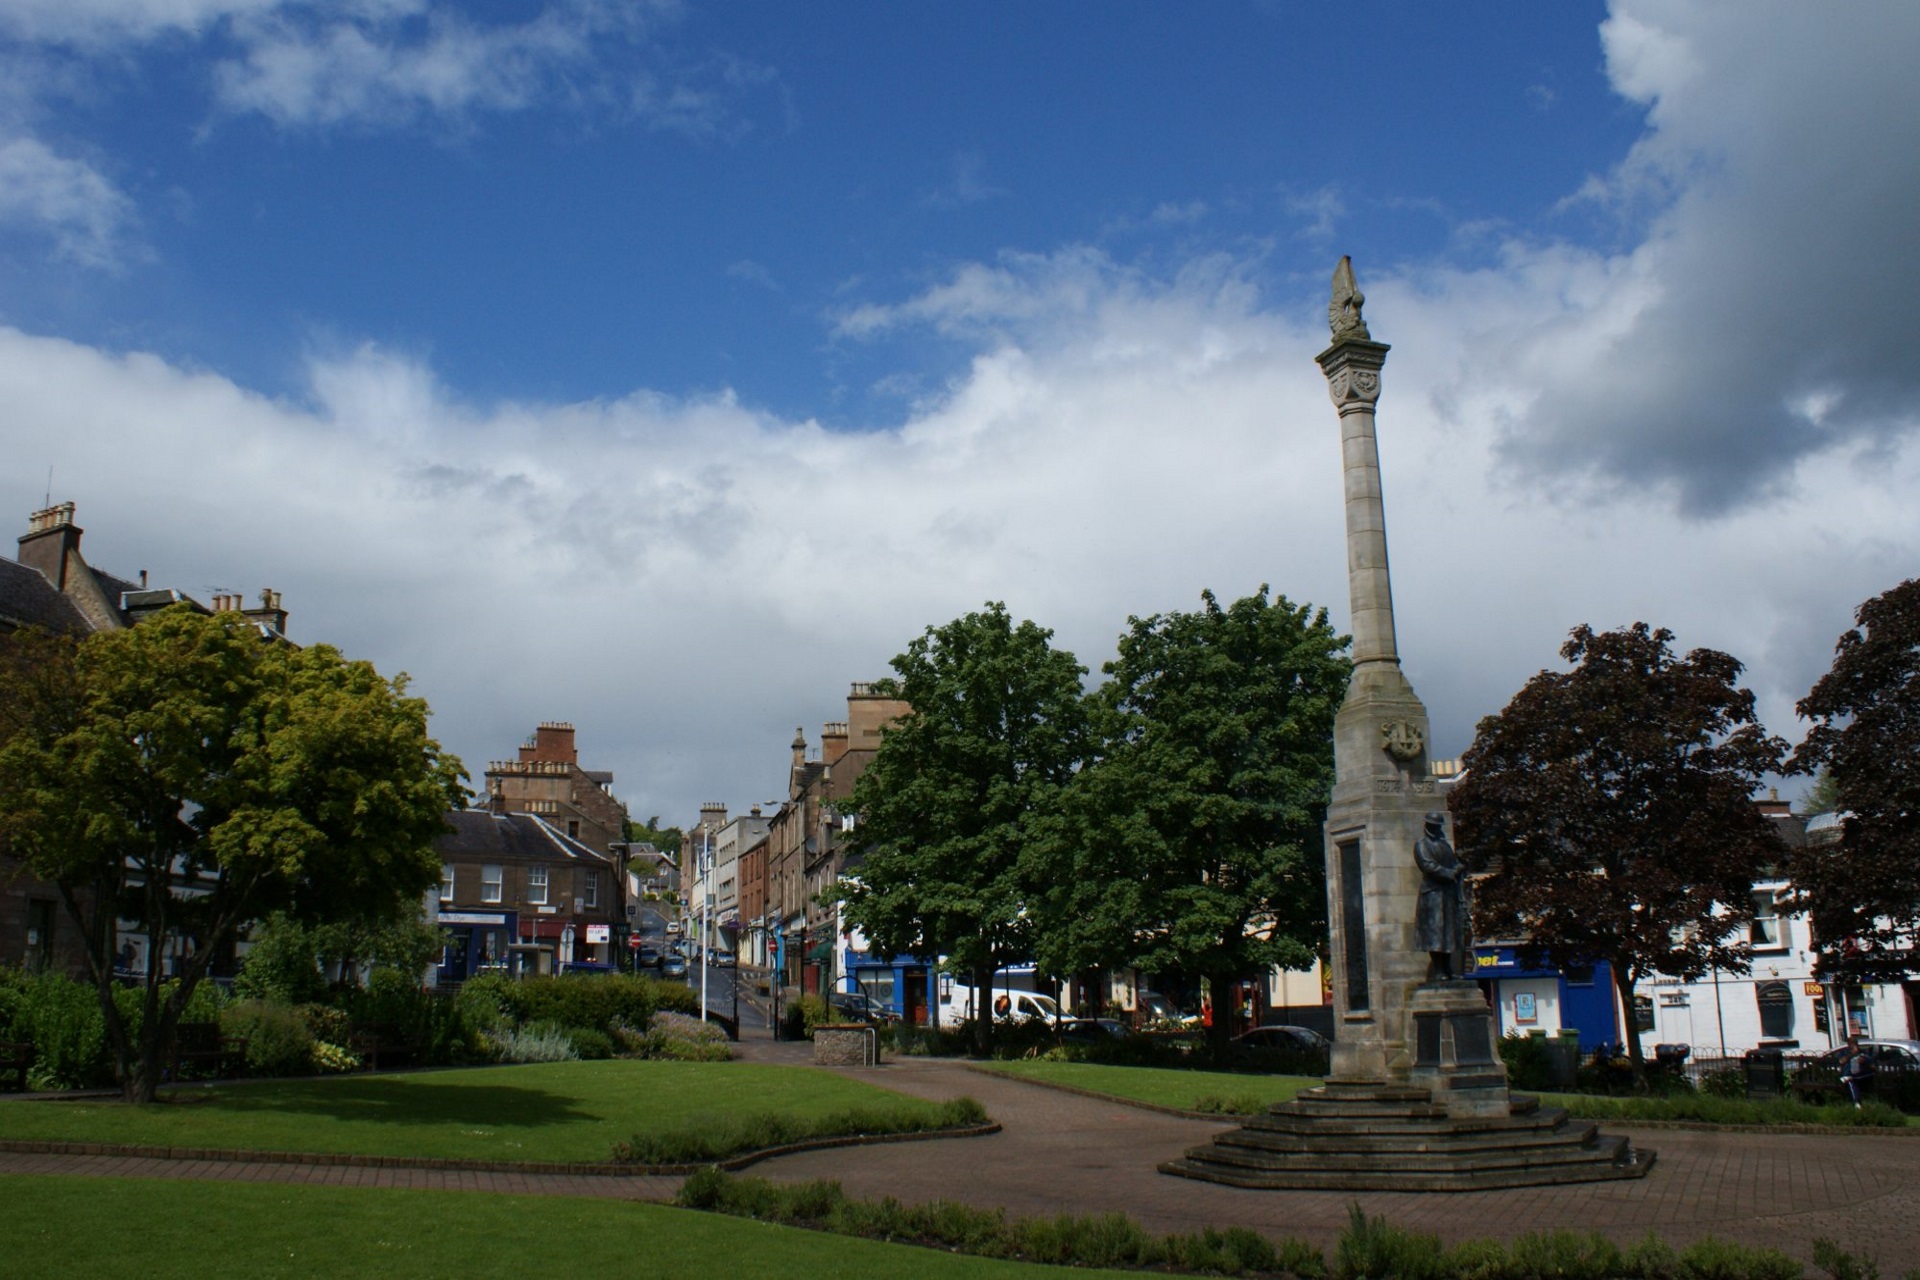 The Wellmeadow in the town centre